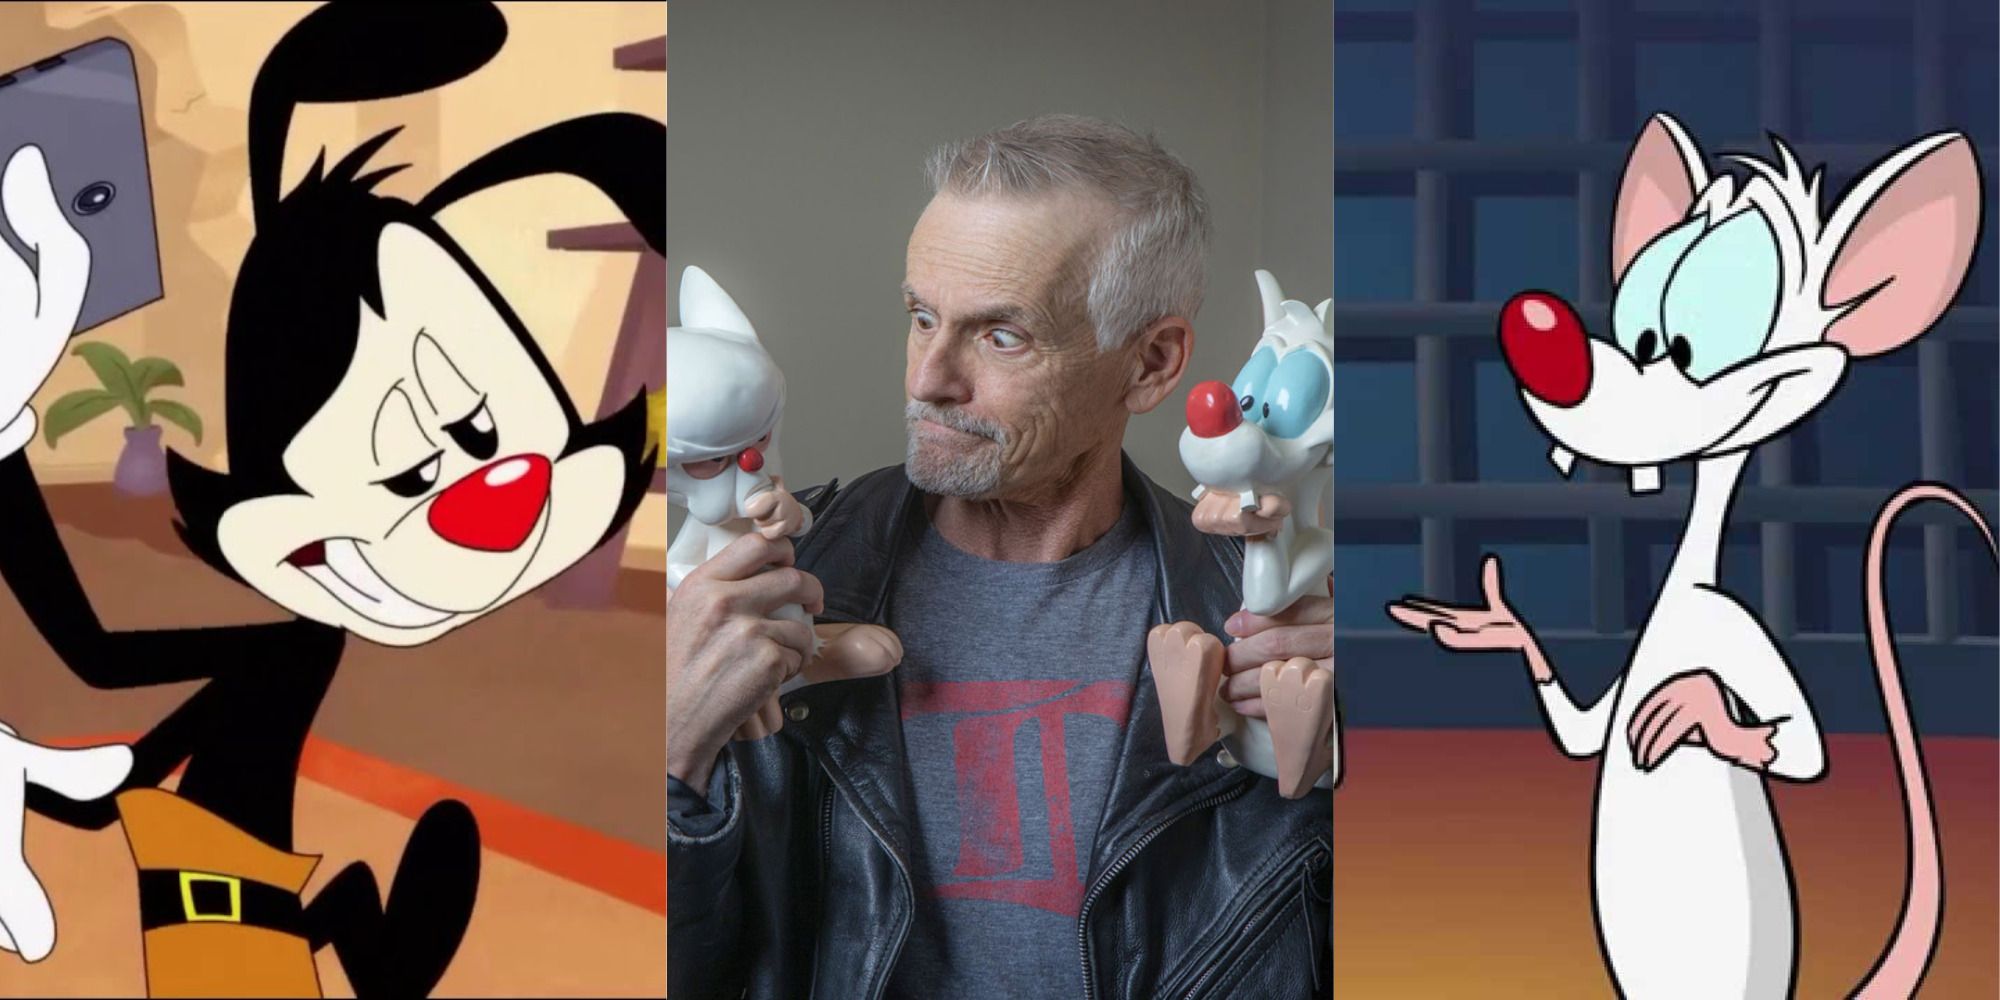 Images of Yakko, Rob Paulson With Brain and Pinky figurines, and Pinky